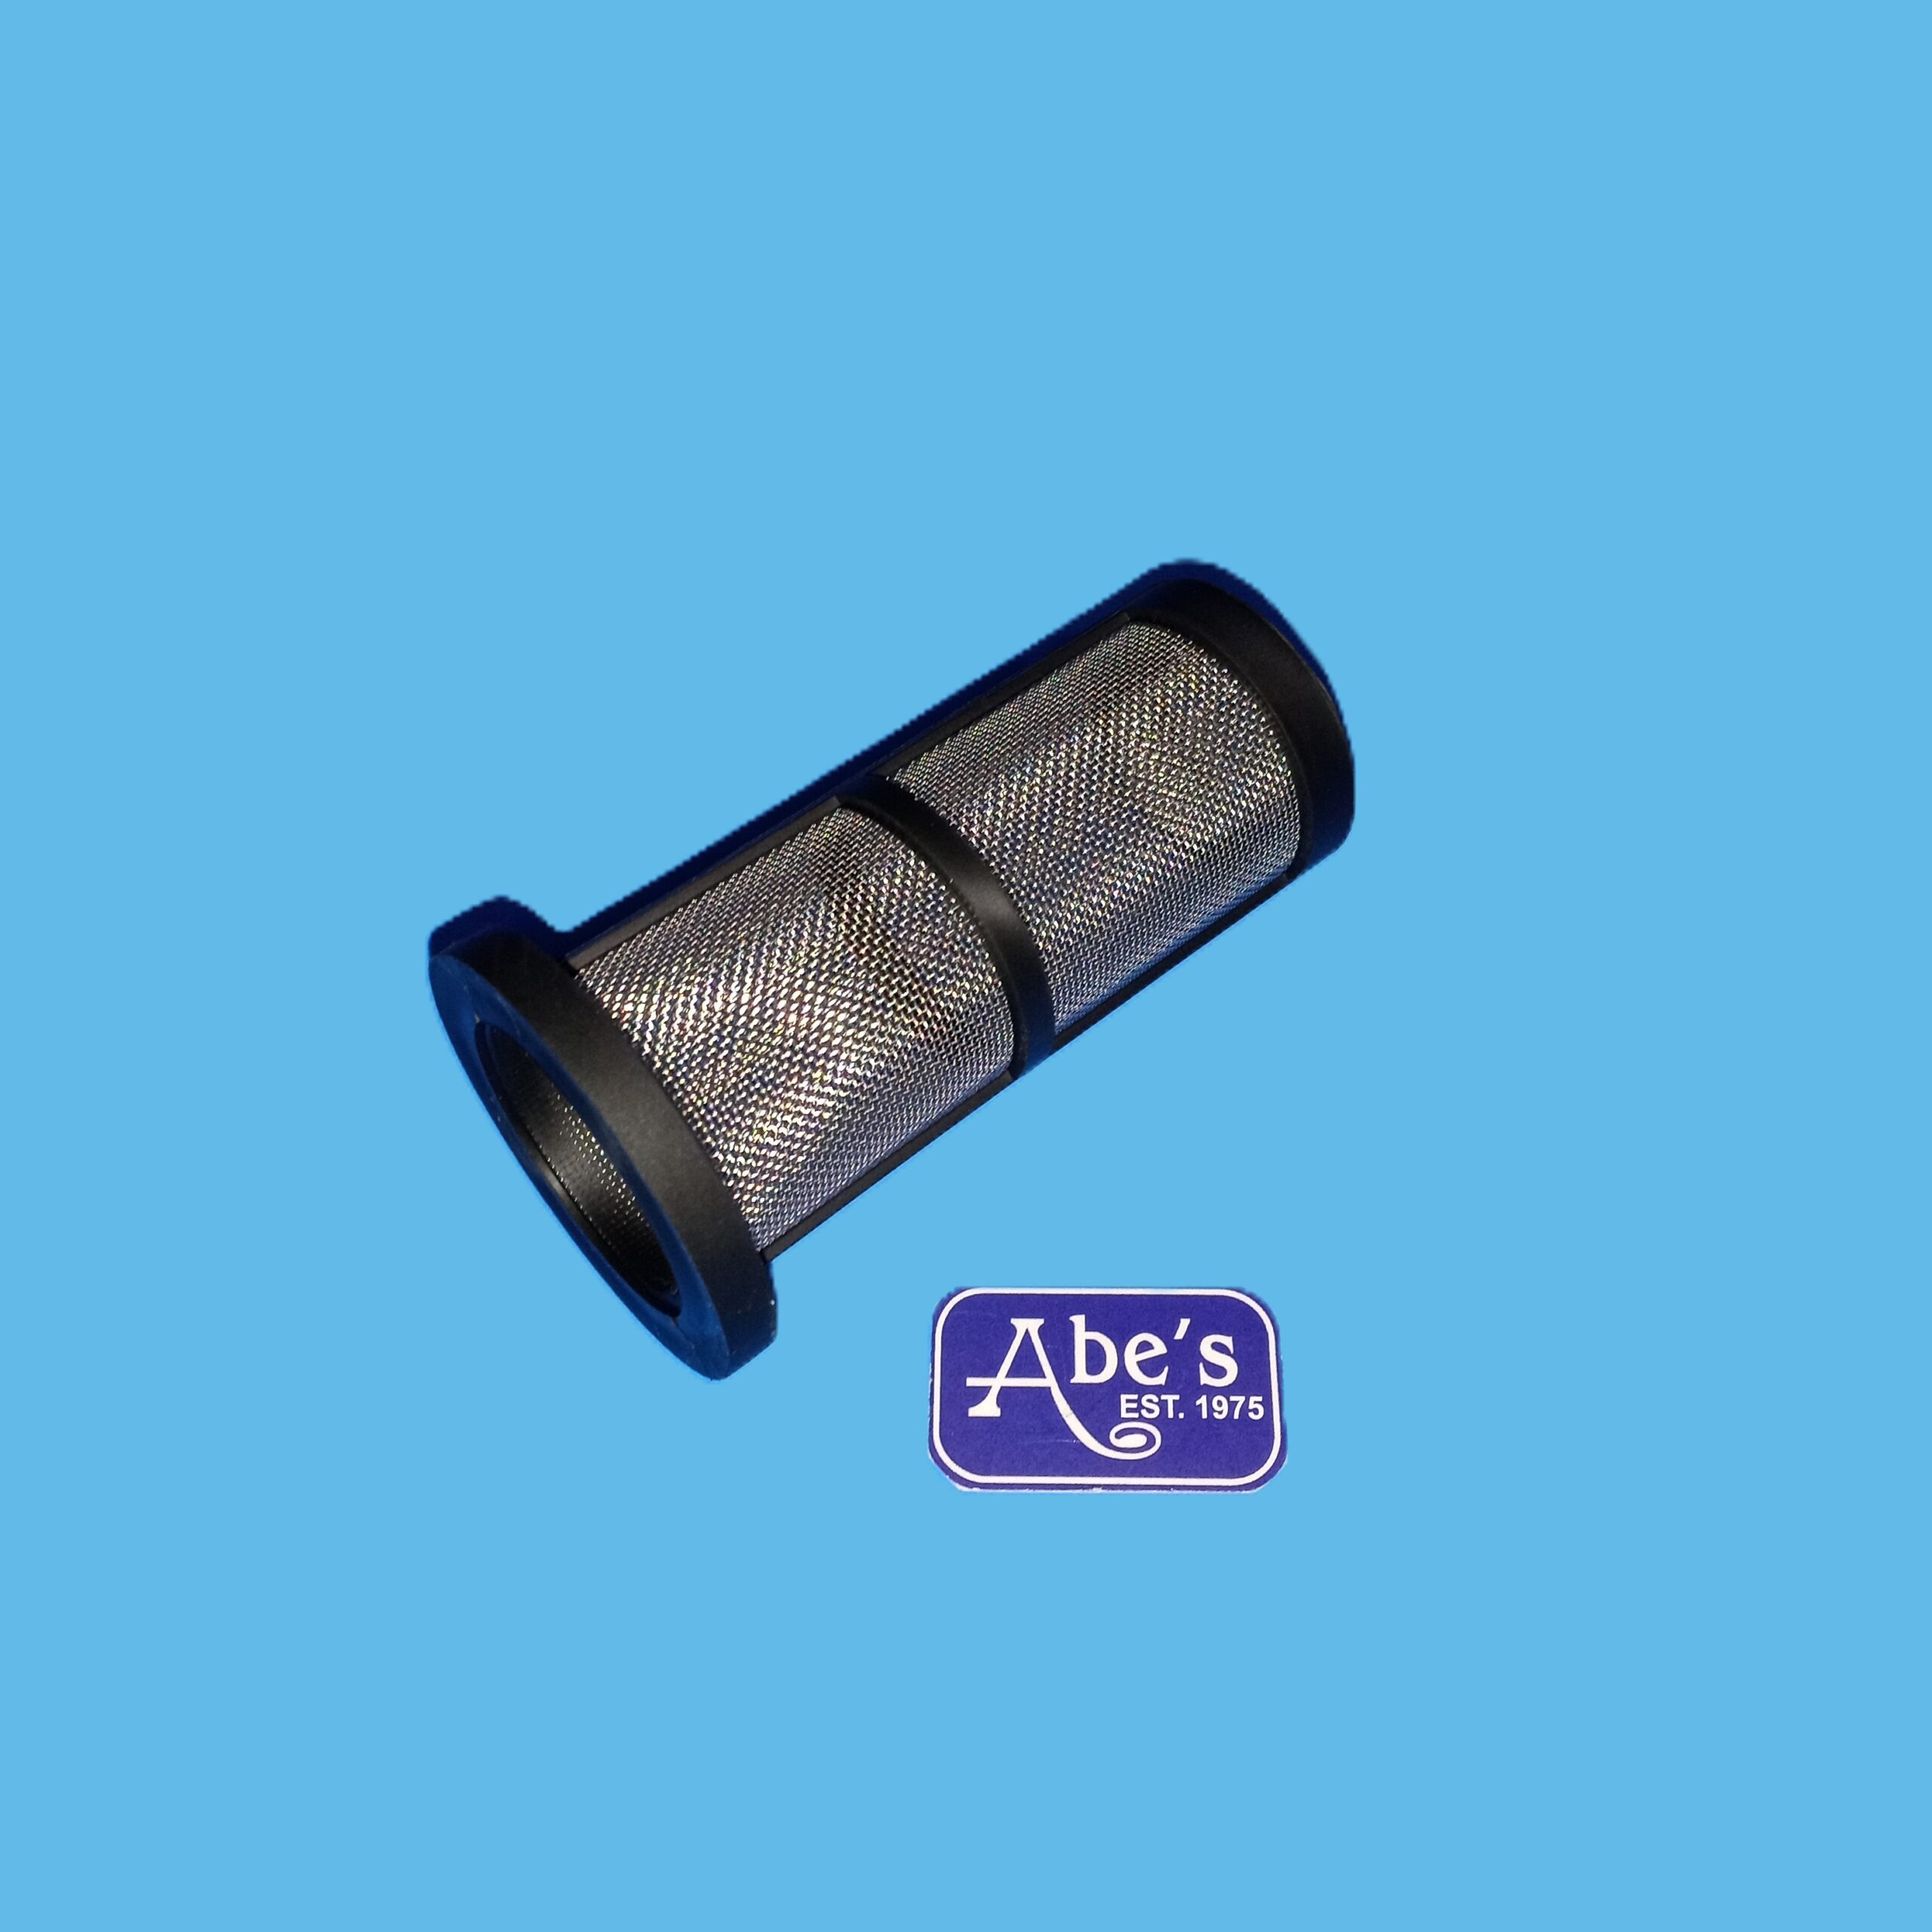 Polaris In-Line Filter Screen for Polaris Pool Cleaners / 48-222 / Affordable $ 9.75 / Hard to Find Pool cleaner parts? Find Hard to Find Parts at Abe's Pools & Spas.